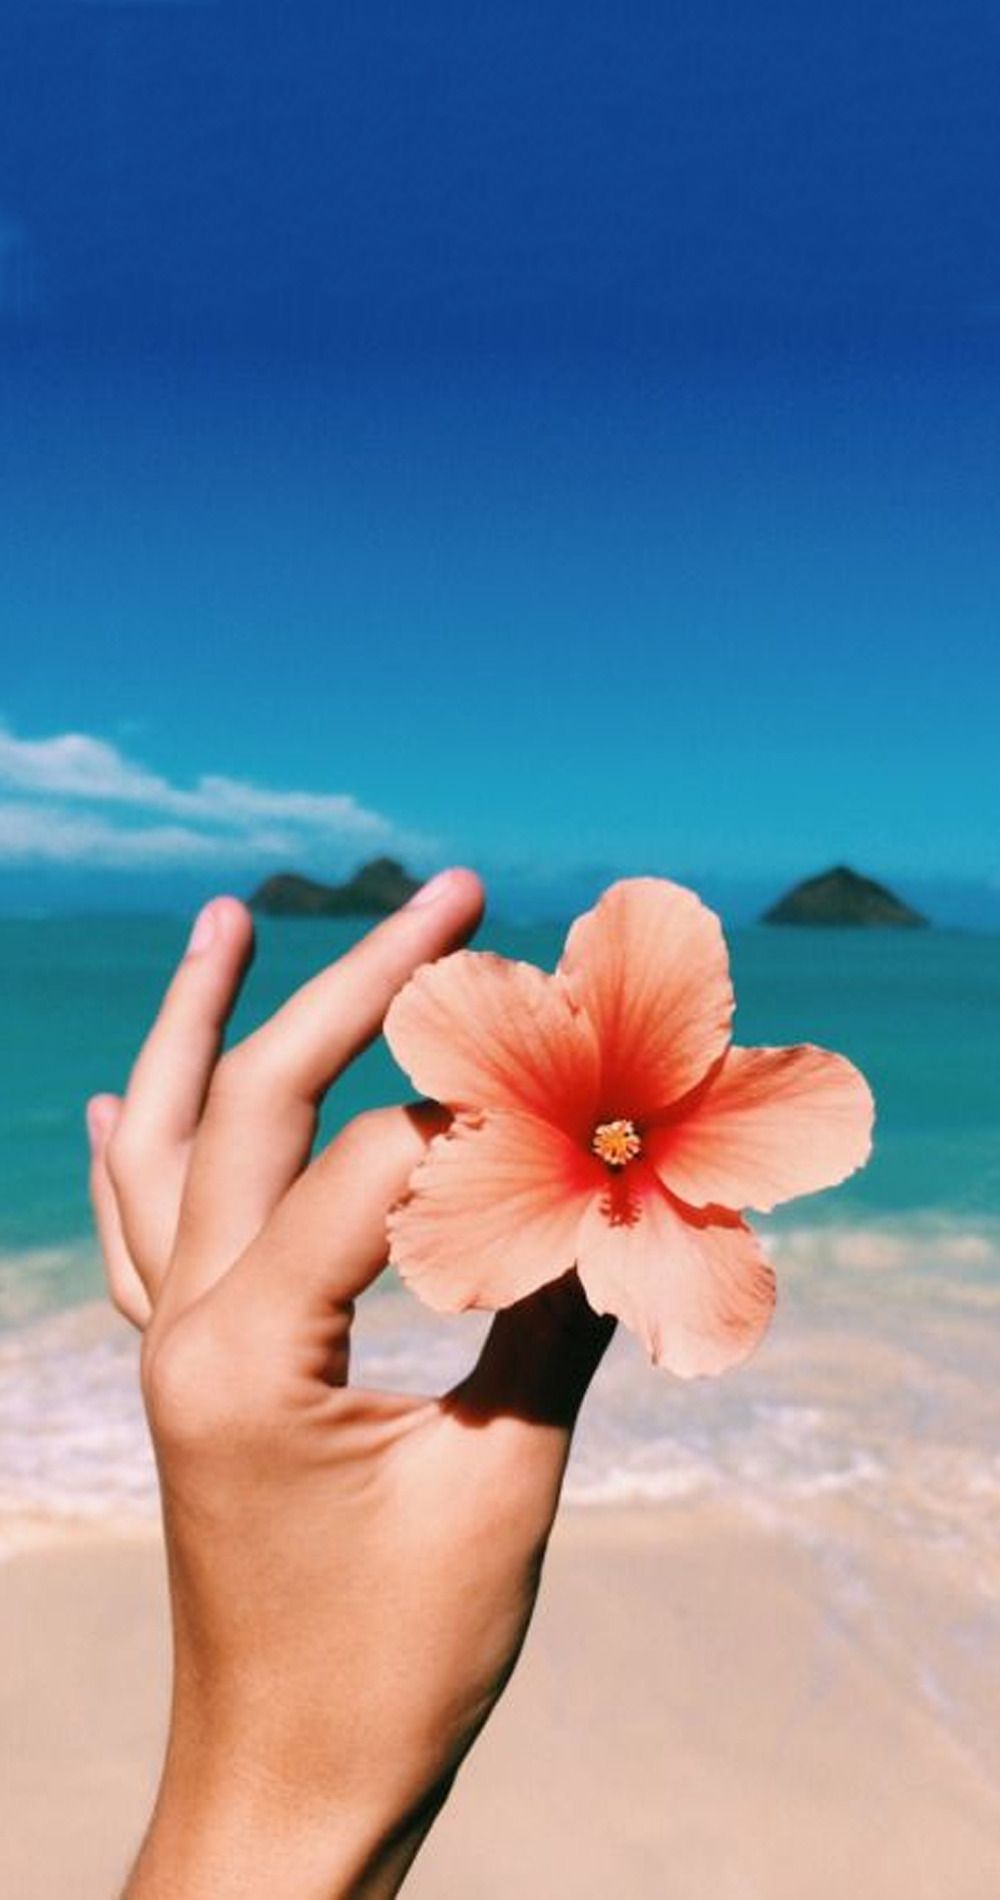 A person holding up an orange flower on the beach - Tropical